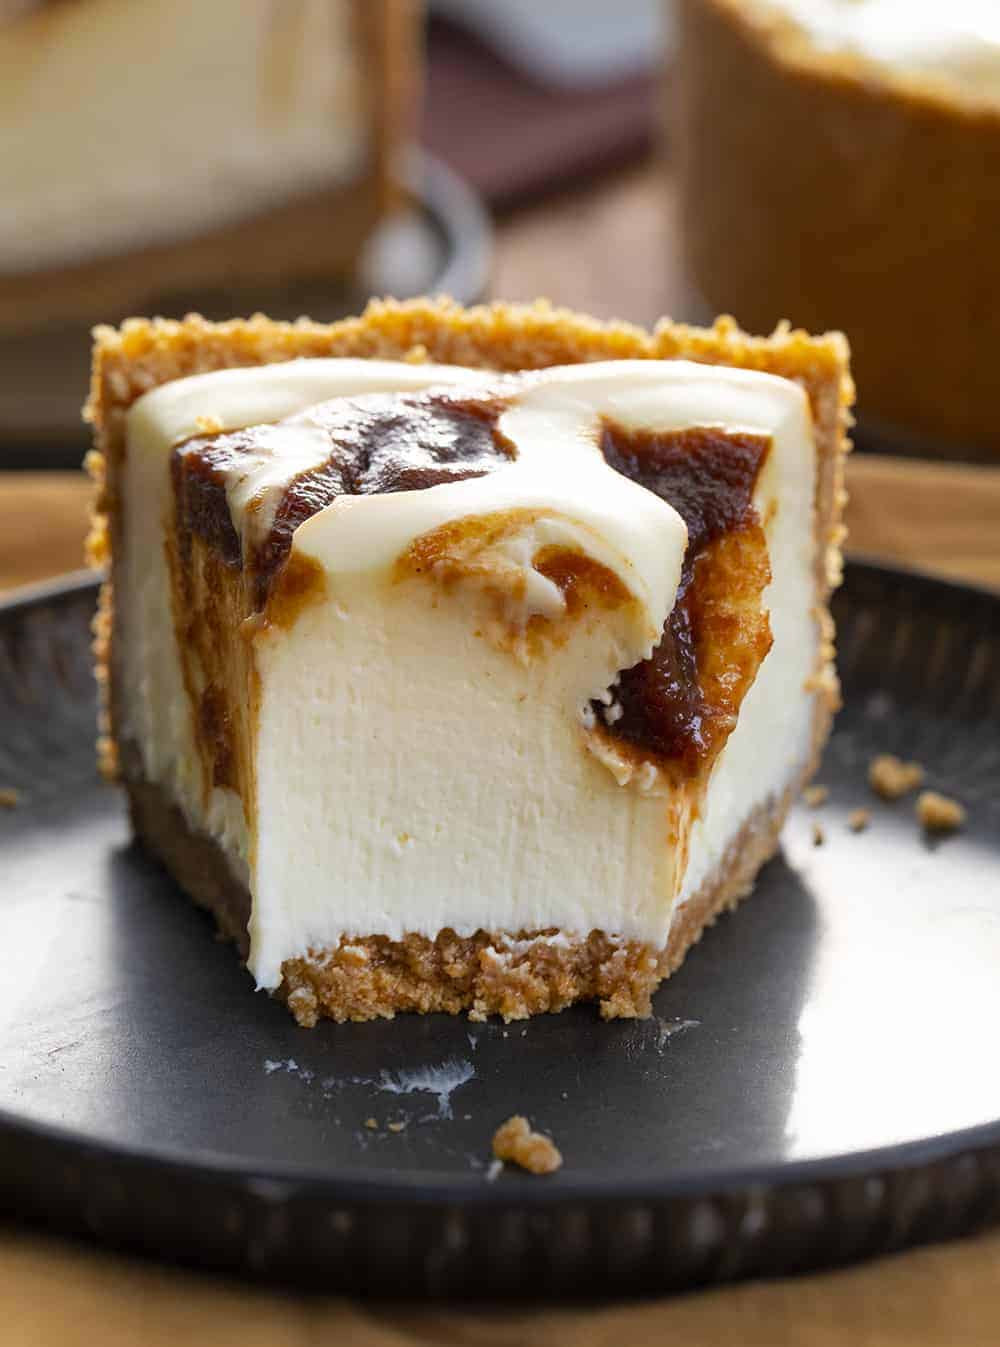 Inside of Apple Butter Cheesecake